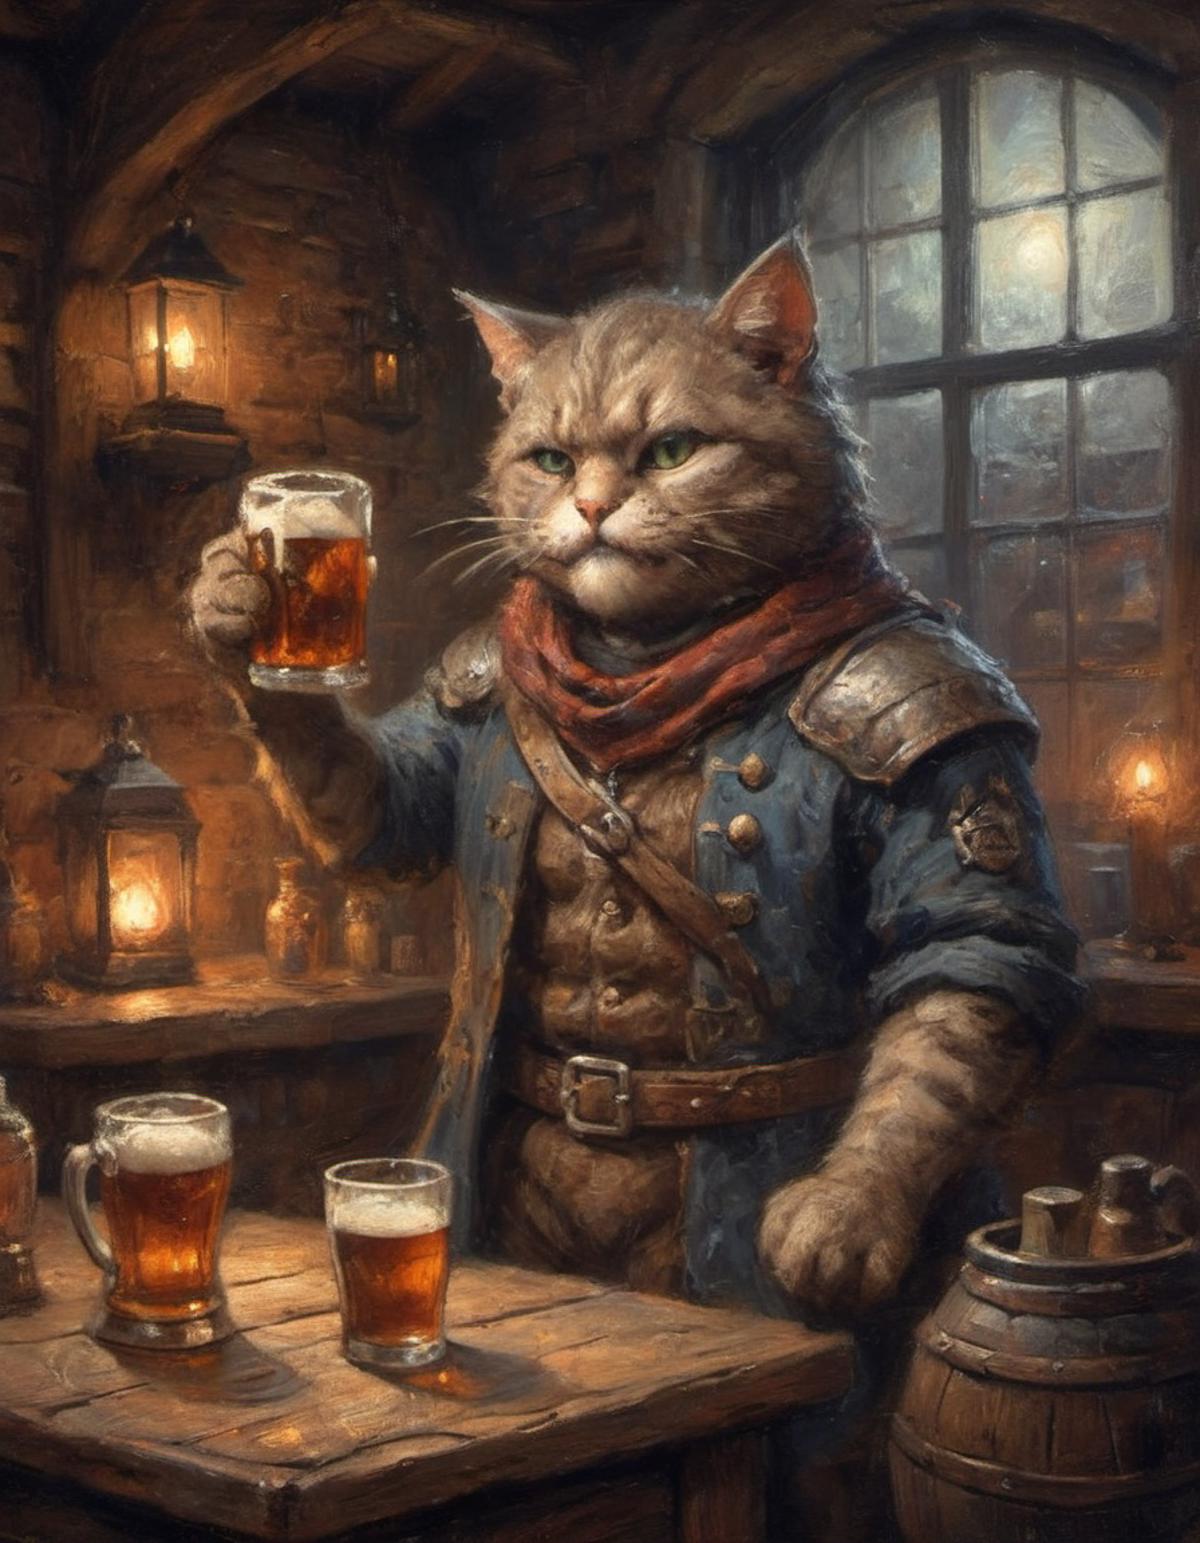 A cat wearing a blue jacket and holding a glass of beer.